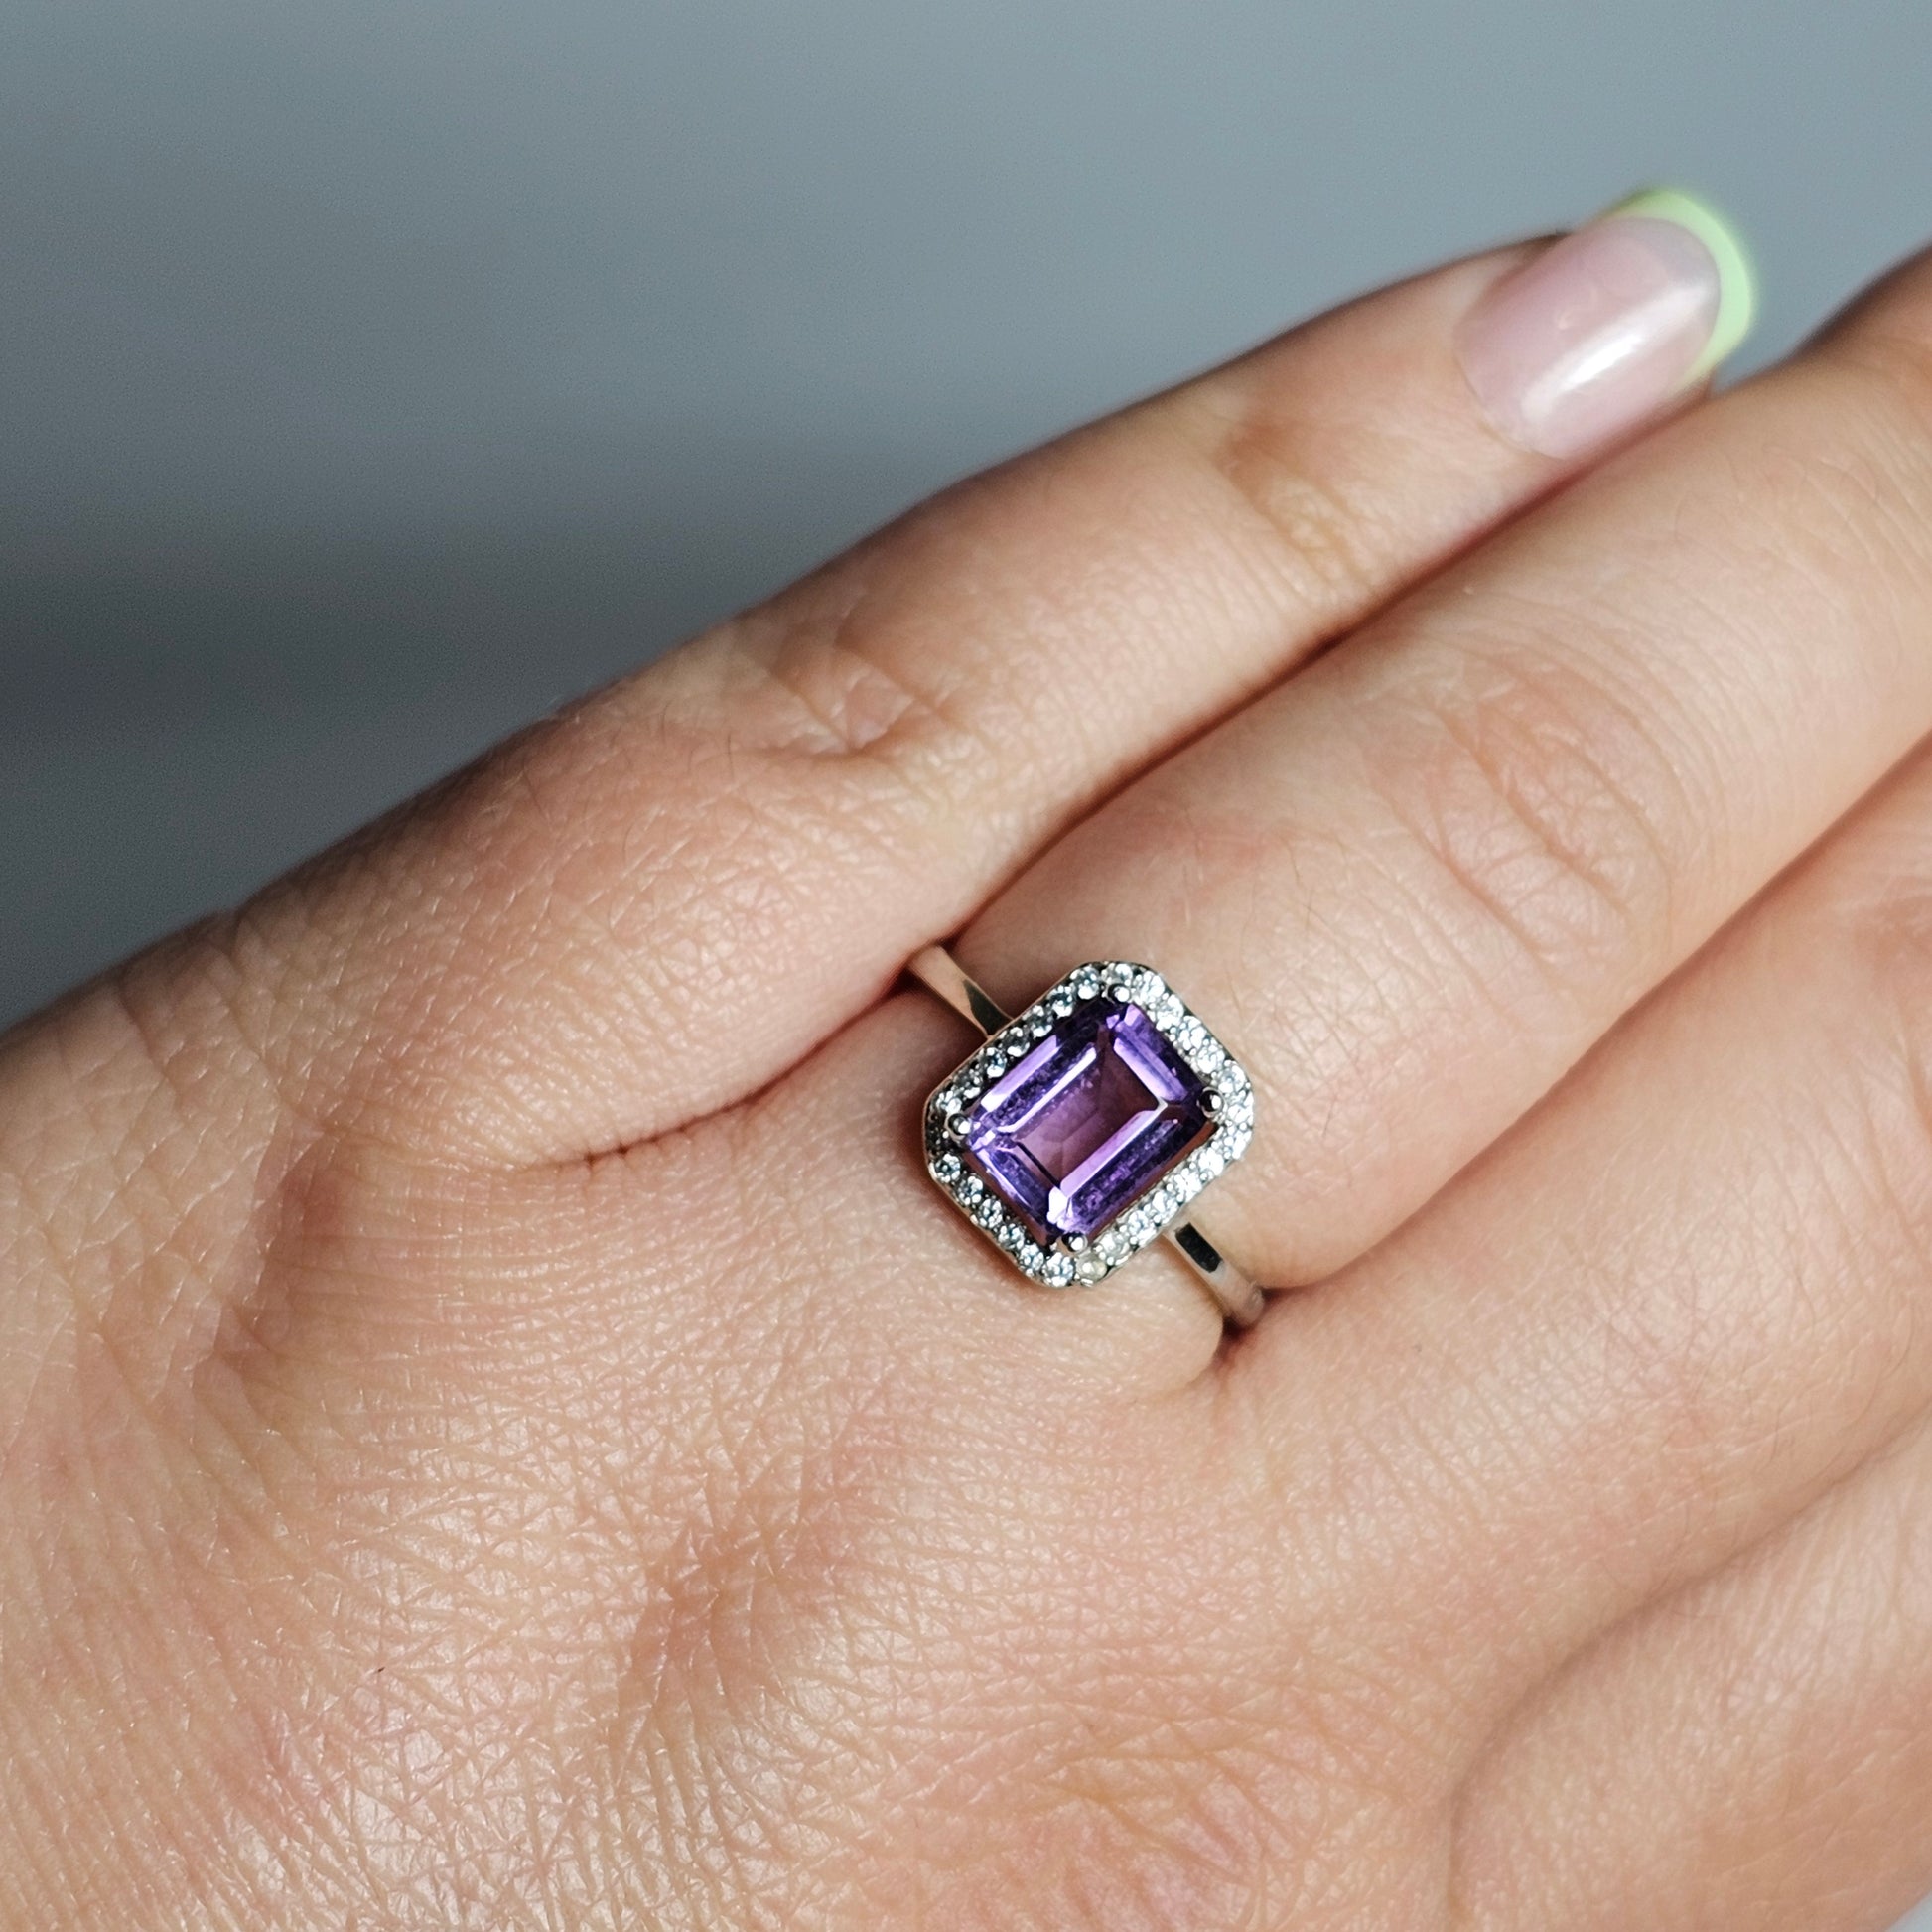 This ring is crafted from sterling silver and features a gorgeous rectangular shaped Amethyst with a Zircon accented crown.